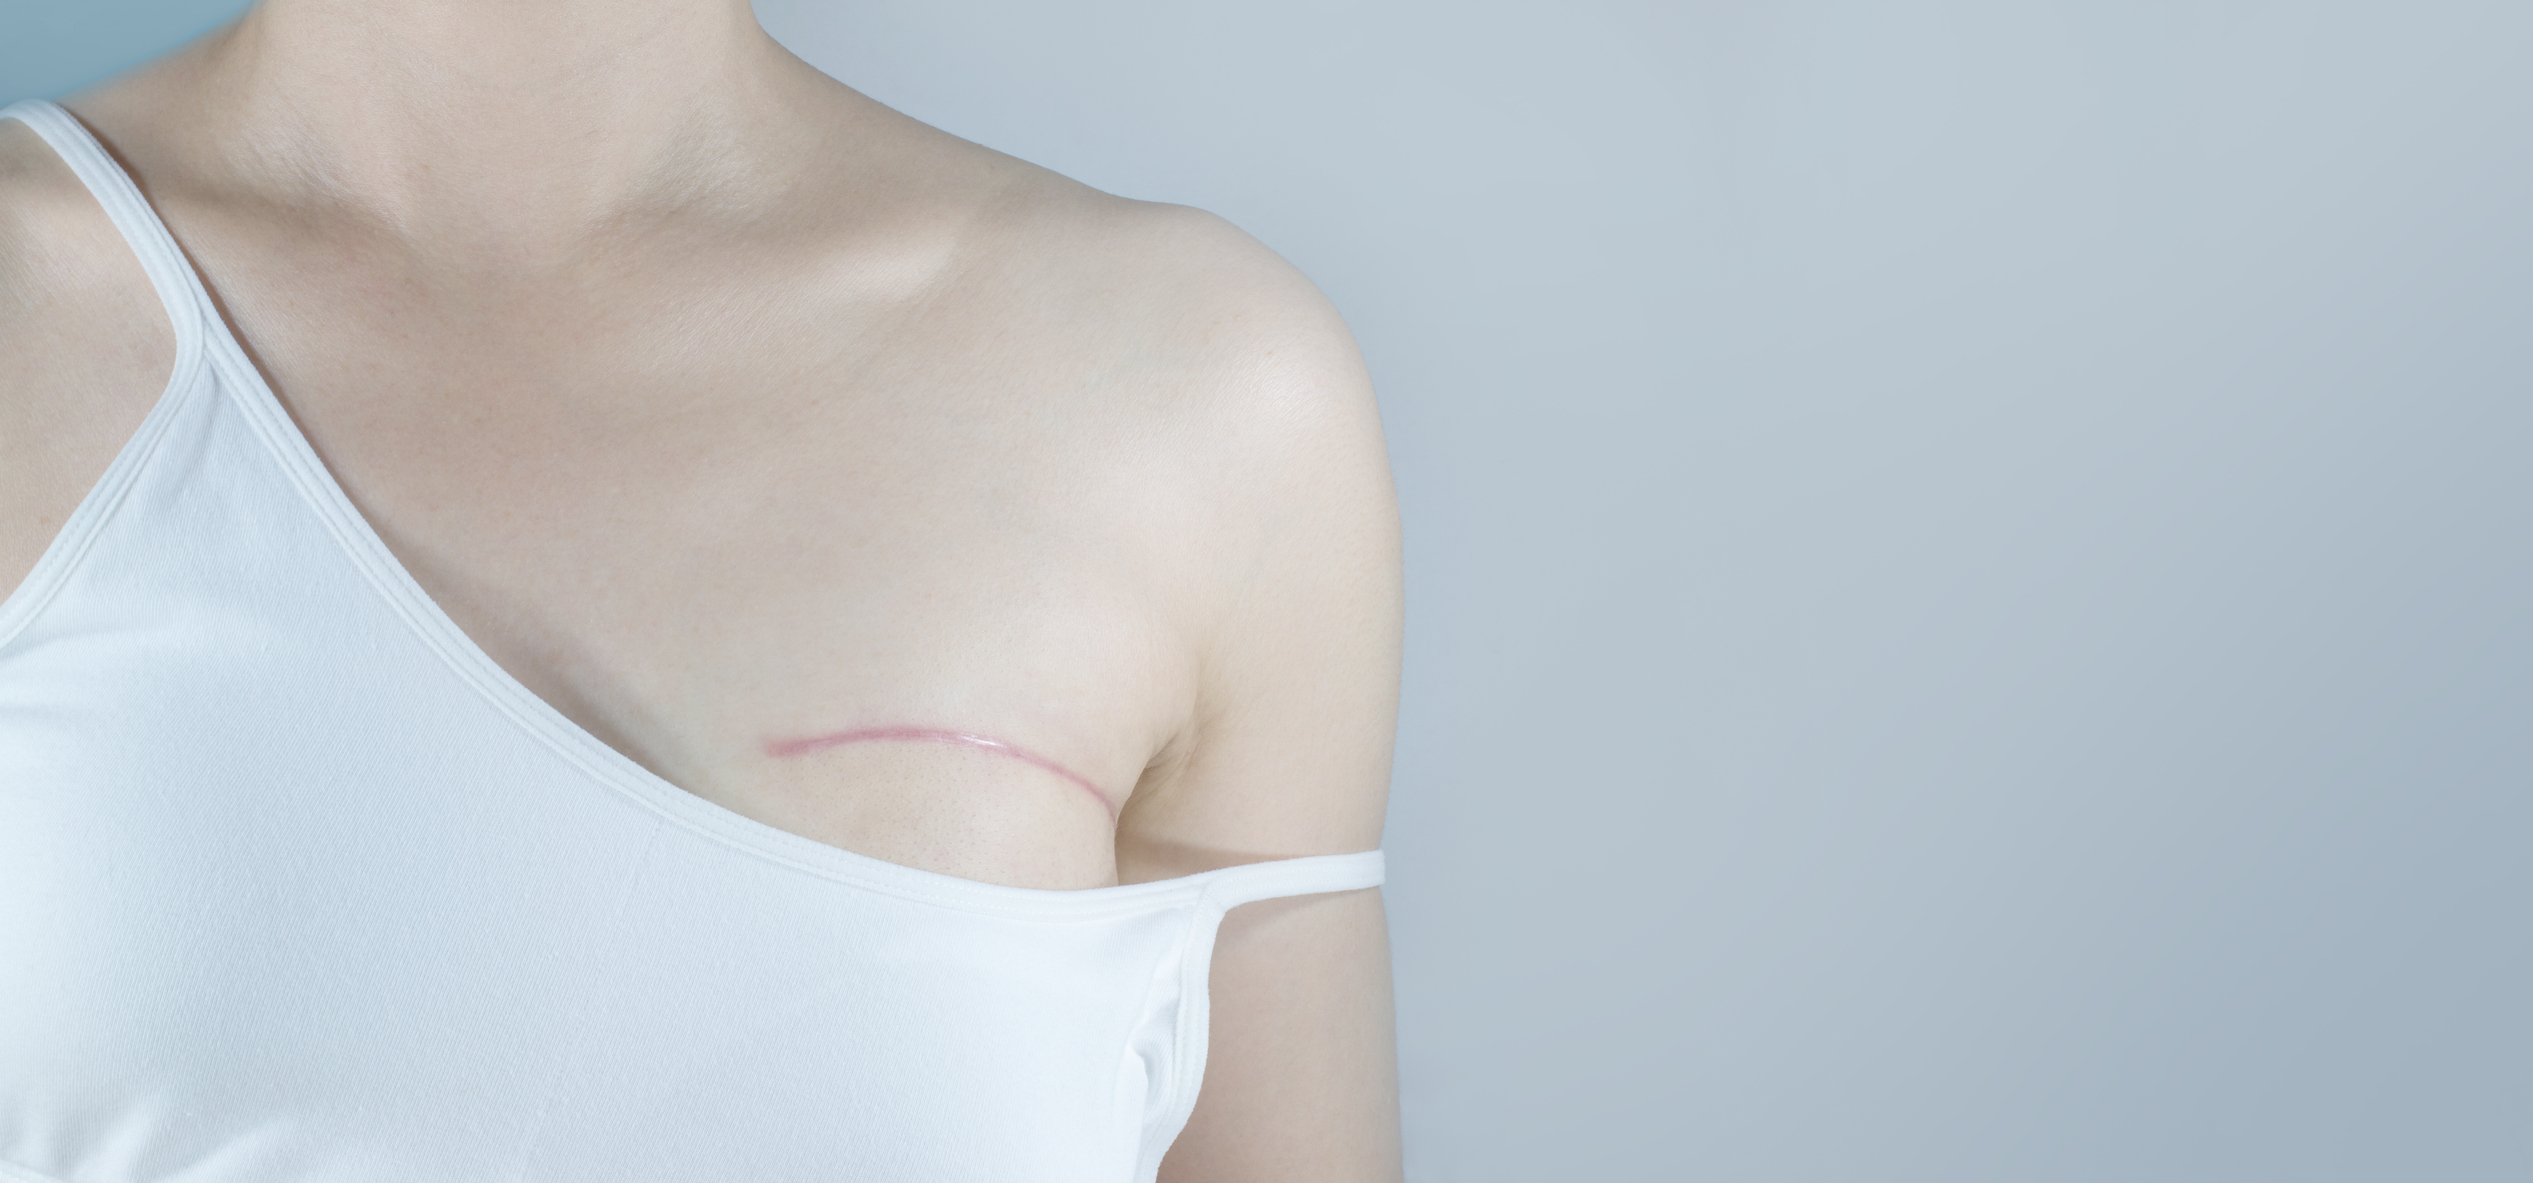 Breast Reconstruction Options Following a Mastectomy